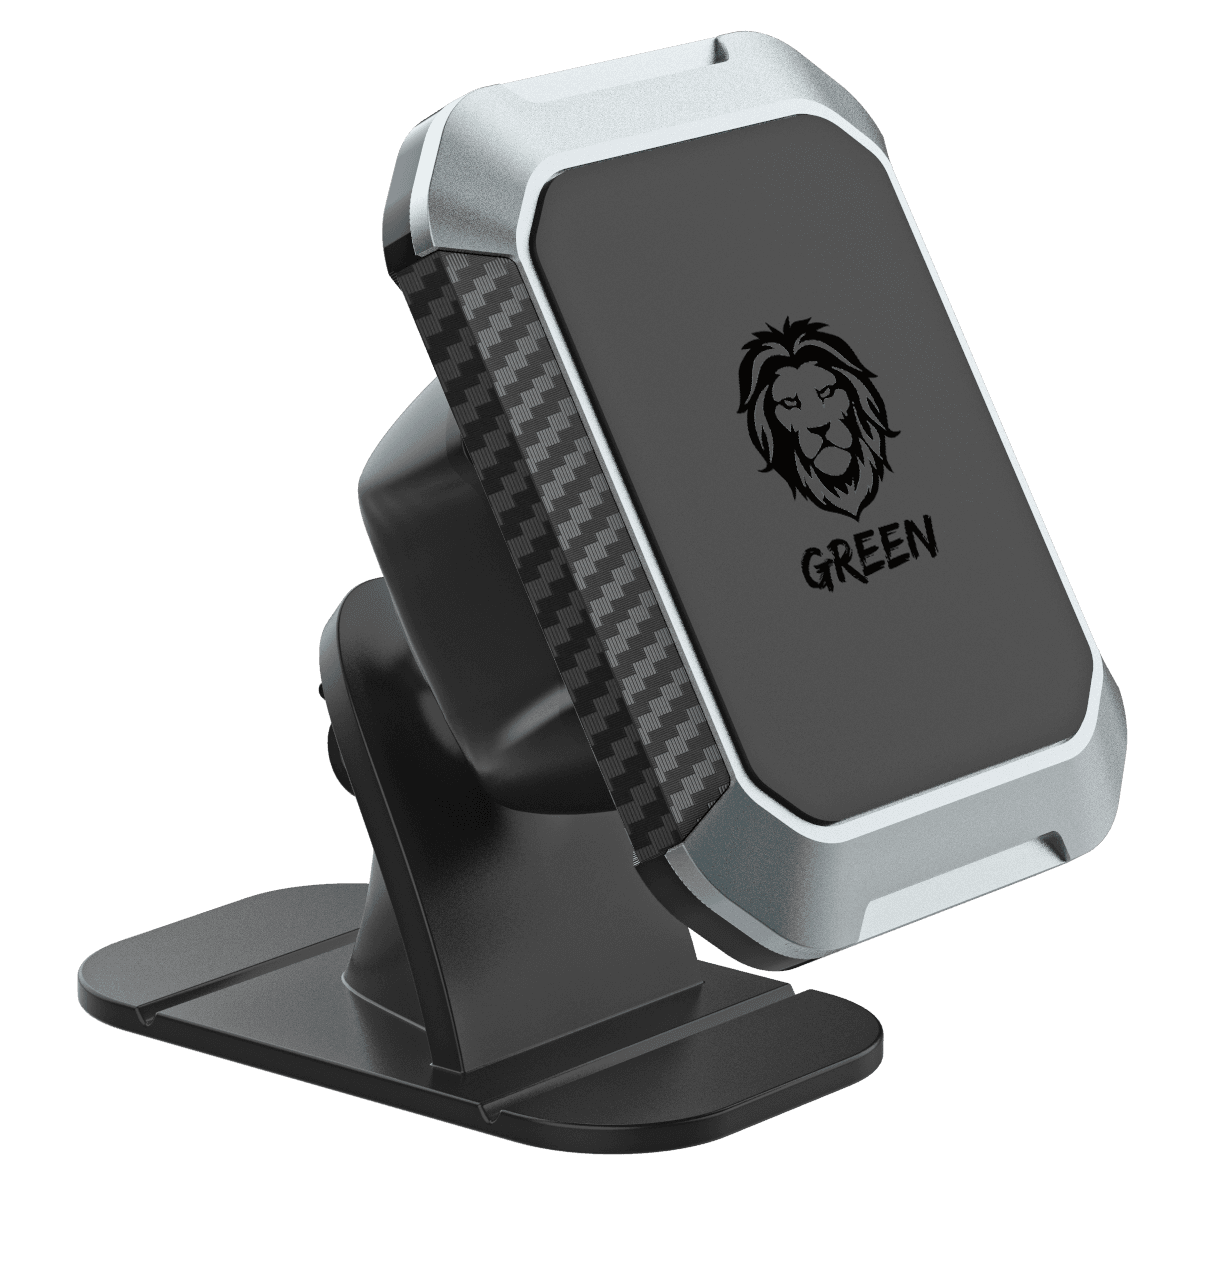 Shop Car phone holder with a guarantee and fast delivery in the